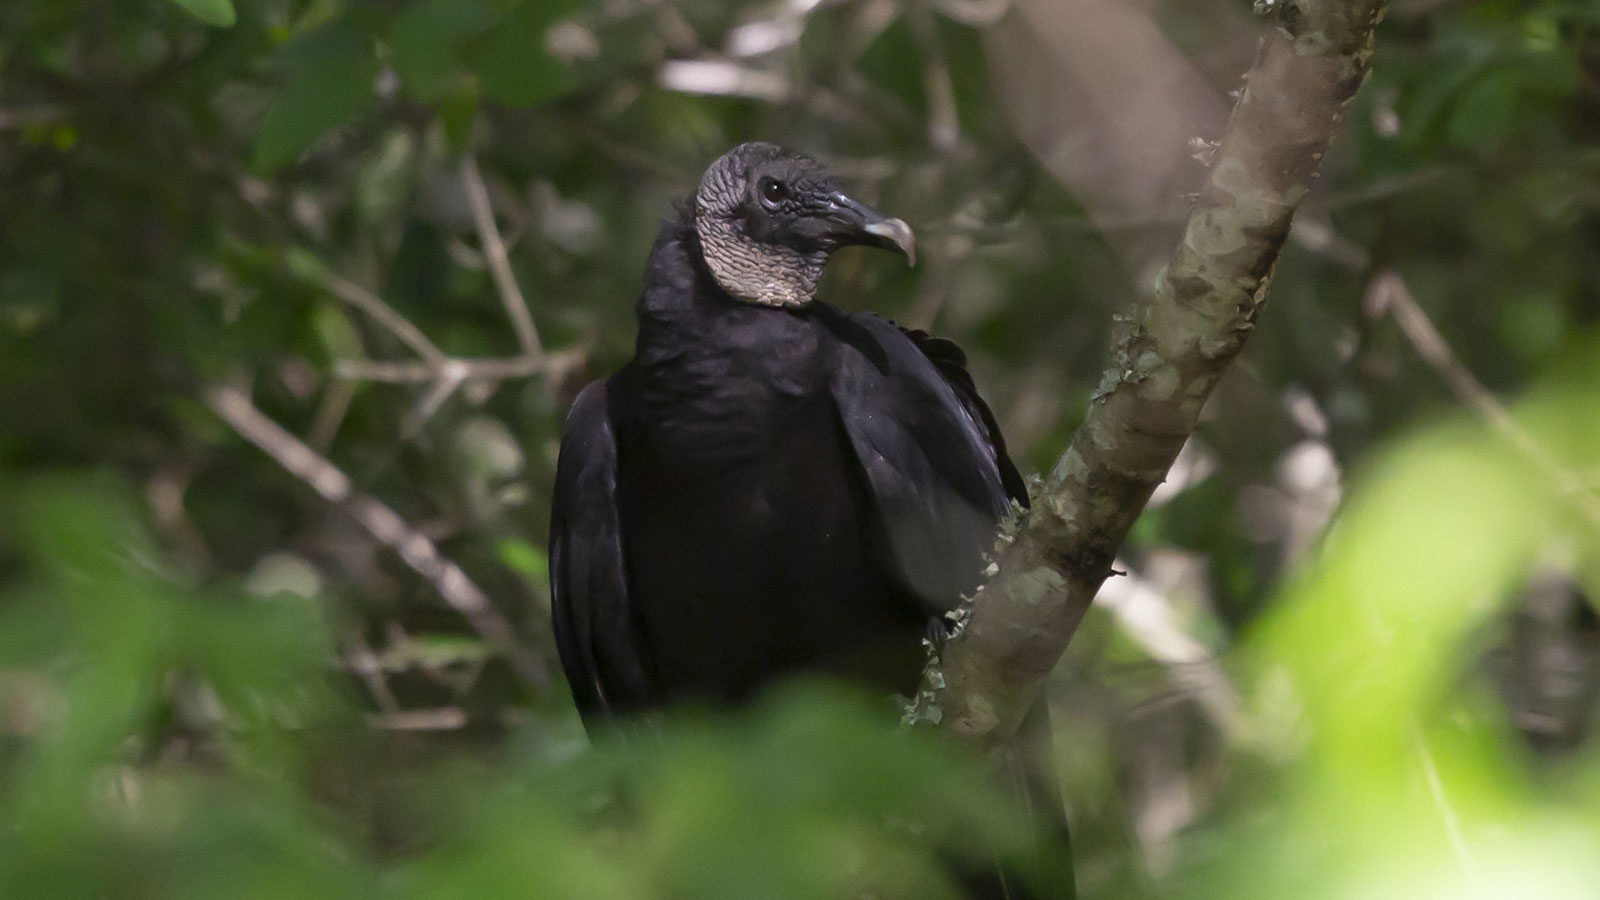 Black vulture looking around through the bramble on a tree branch